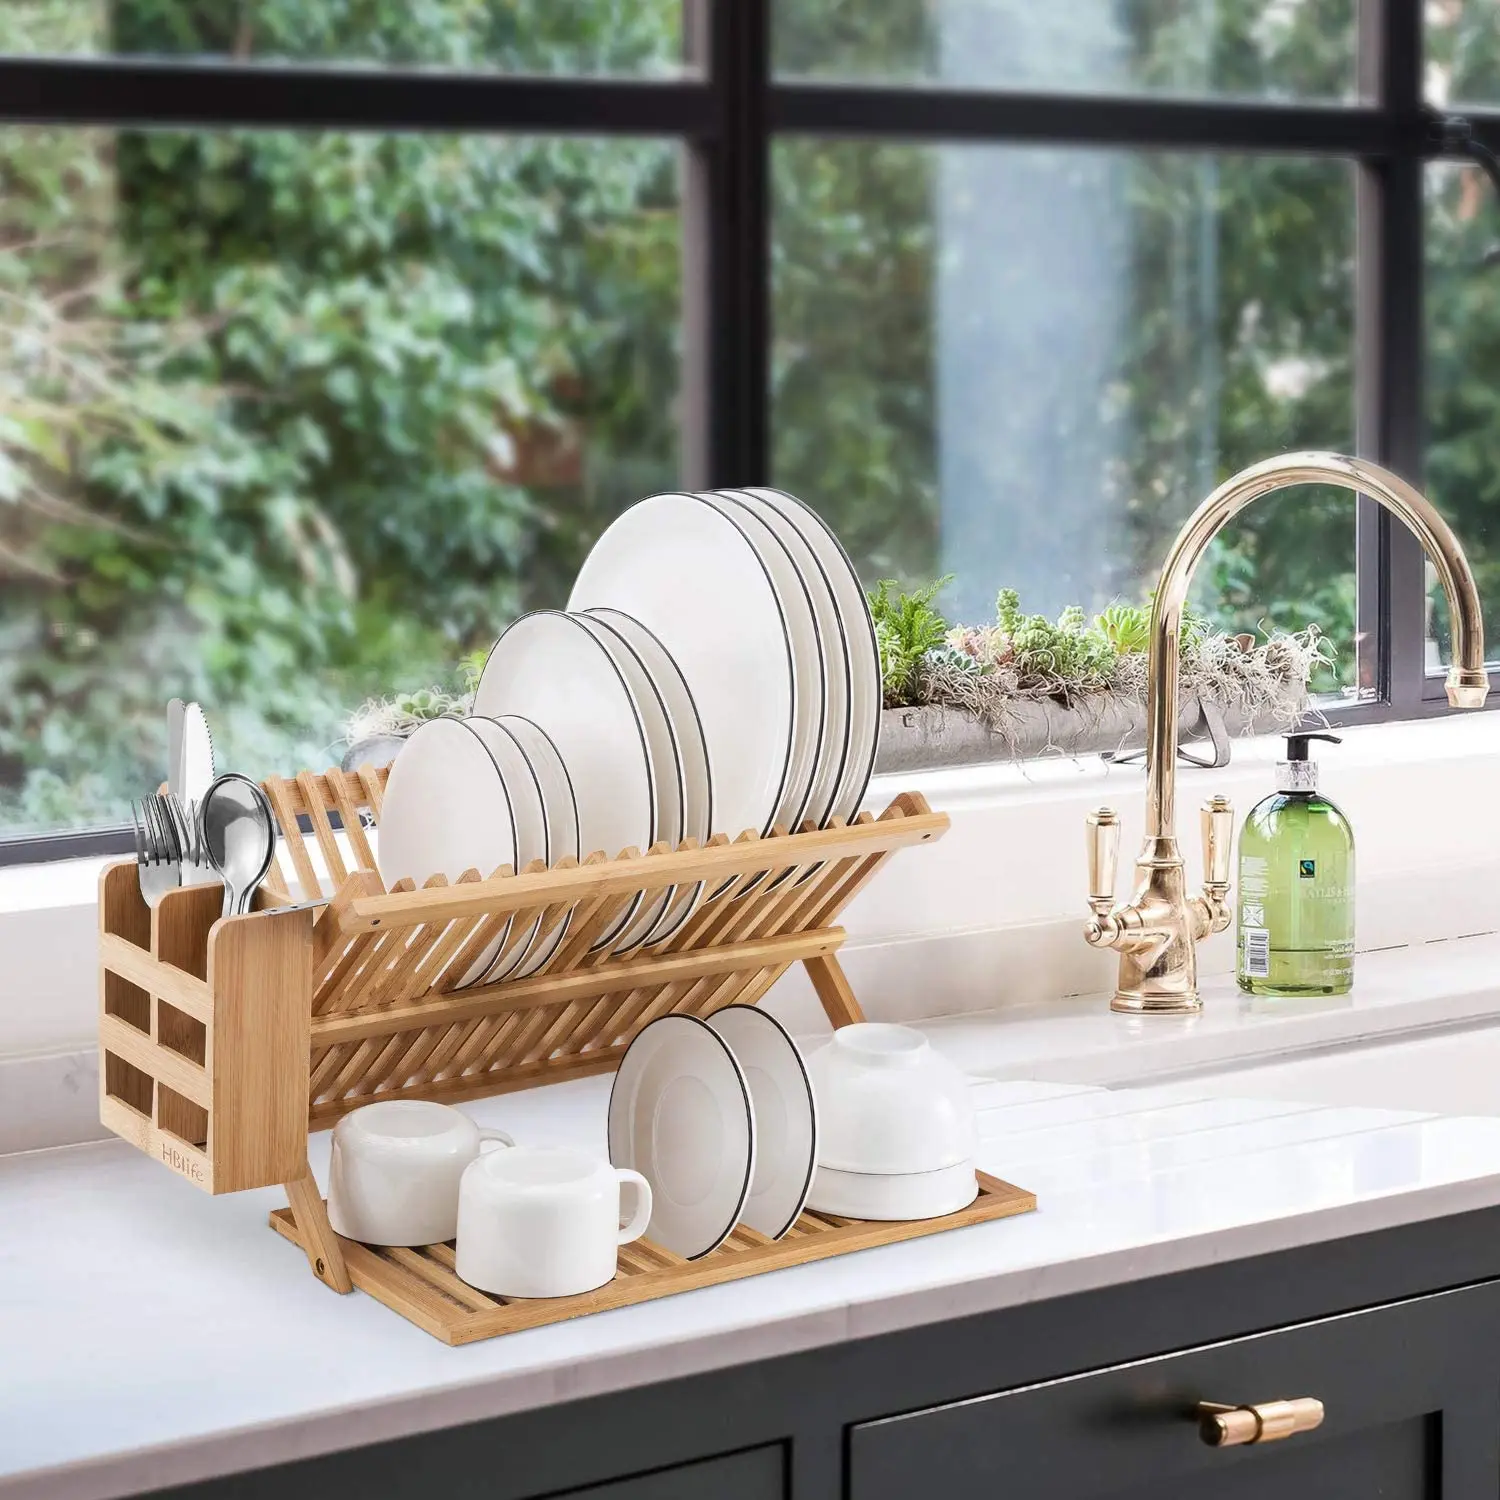 

Bamboo Dish Drying Rack with Utensils Flatware Holder Set Large Folding Drying Holder for Kitchen, Collapsible Drainer, Customized color or bamboo color